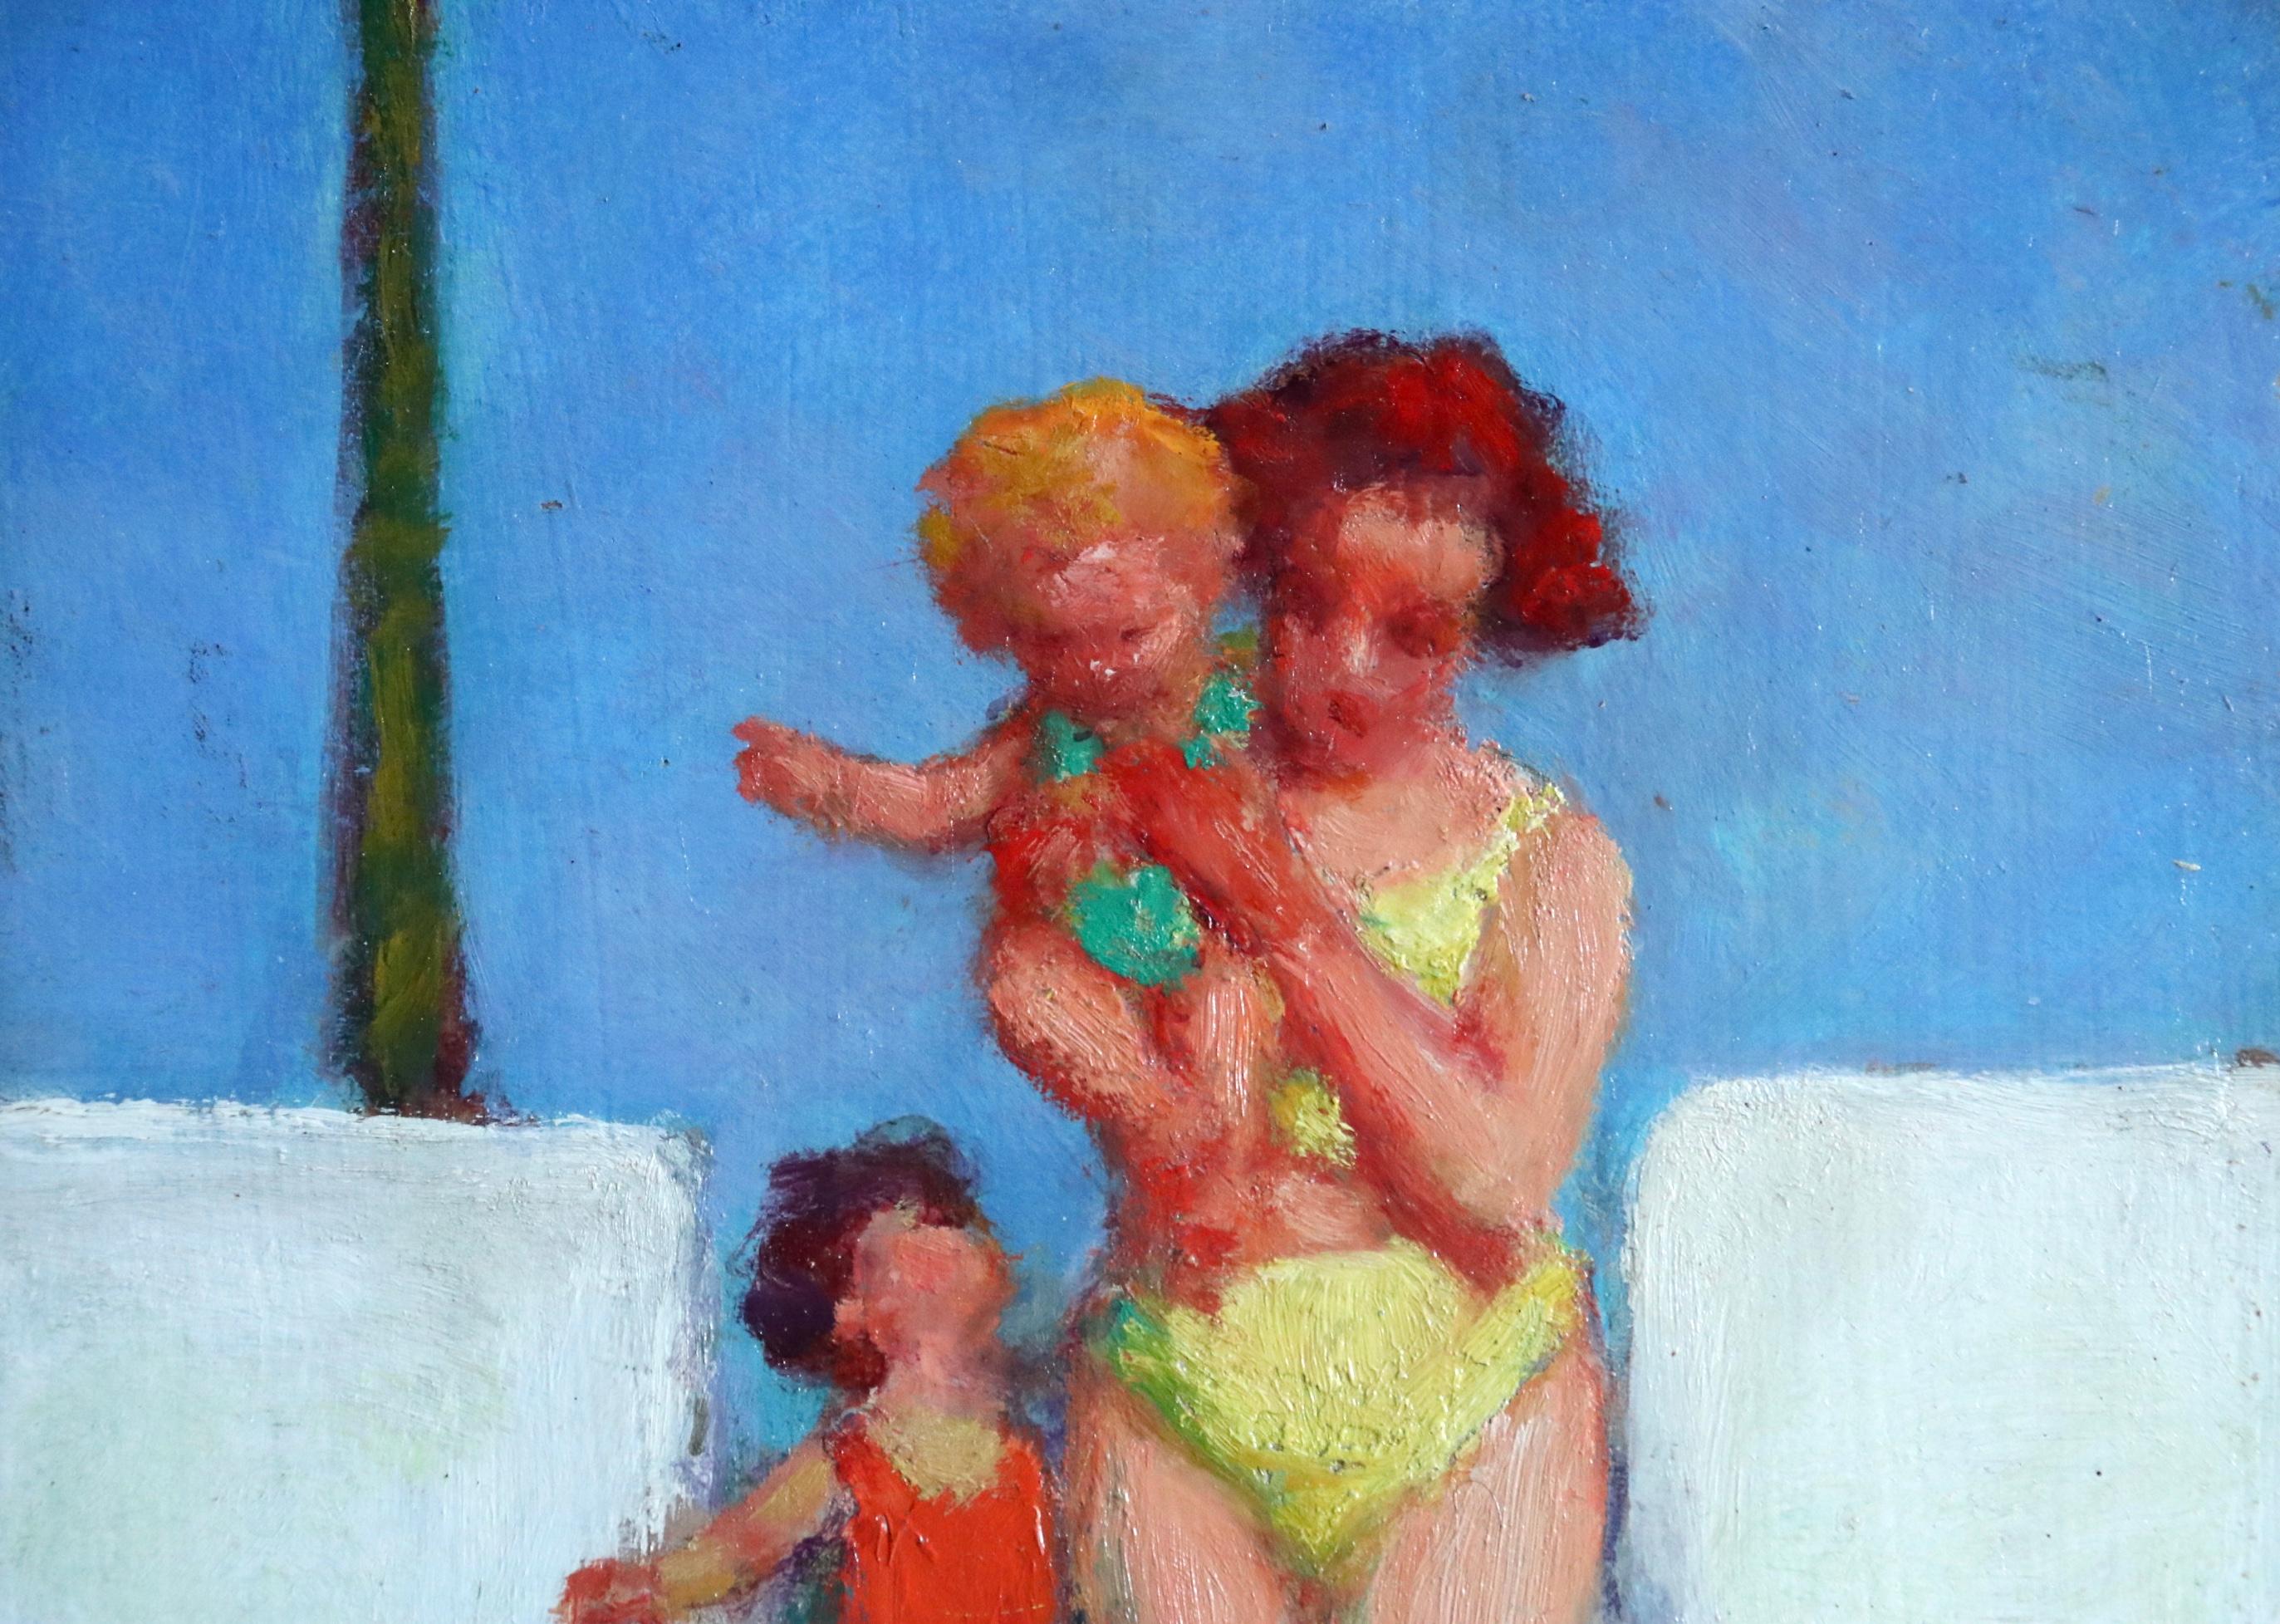 Oil on panel by Italian painter Bernardo Biancale depicting a mother in a bathing suit carrying a baby down some steps on a bright sunny day as another small child follows. Signed lower left. This painting is not currently framed but a suitable